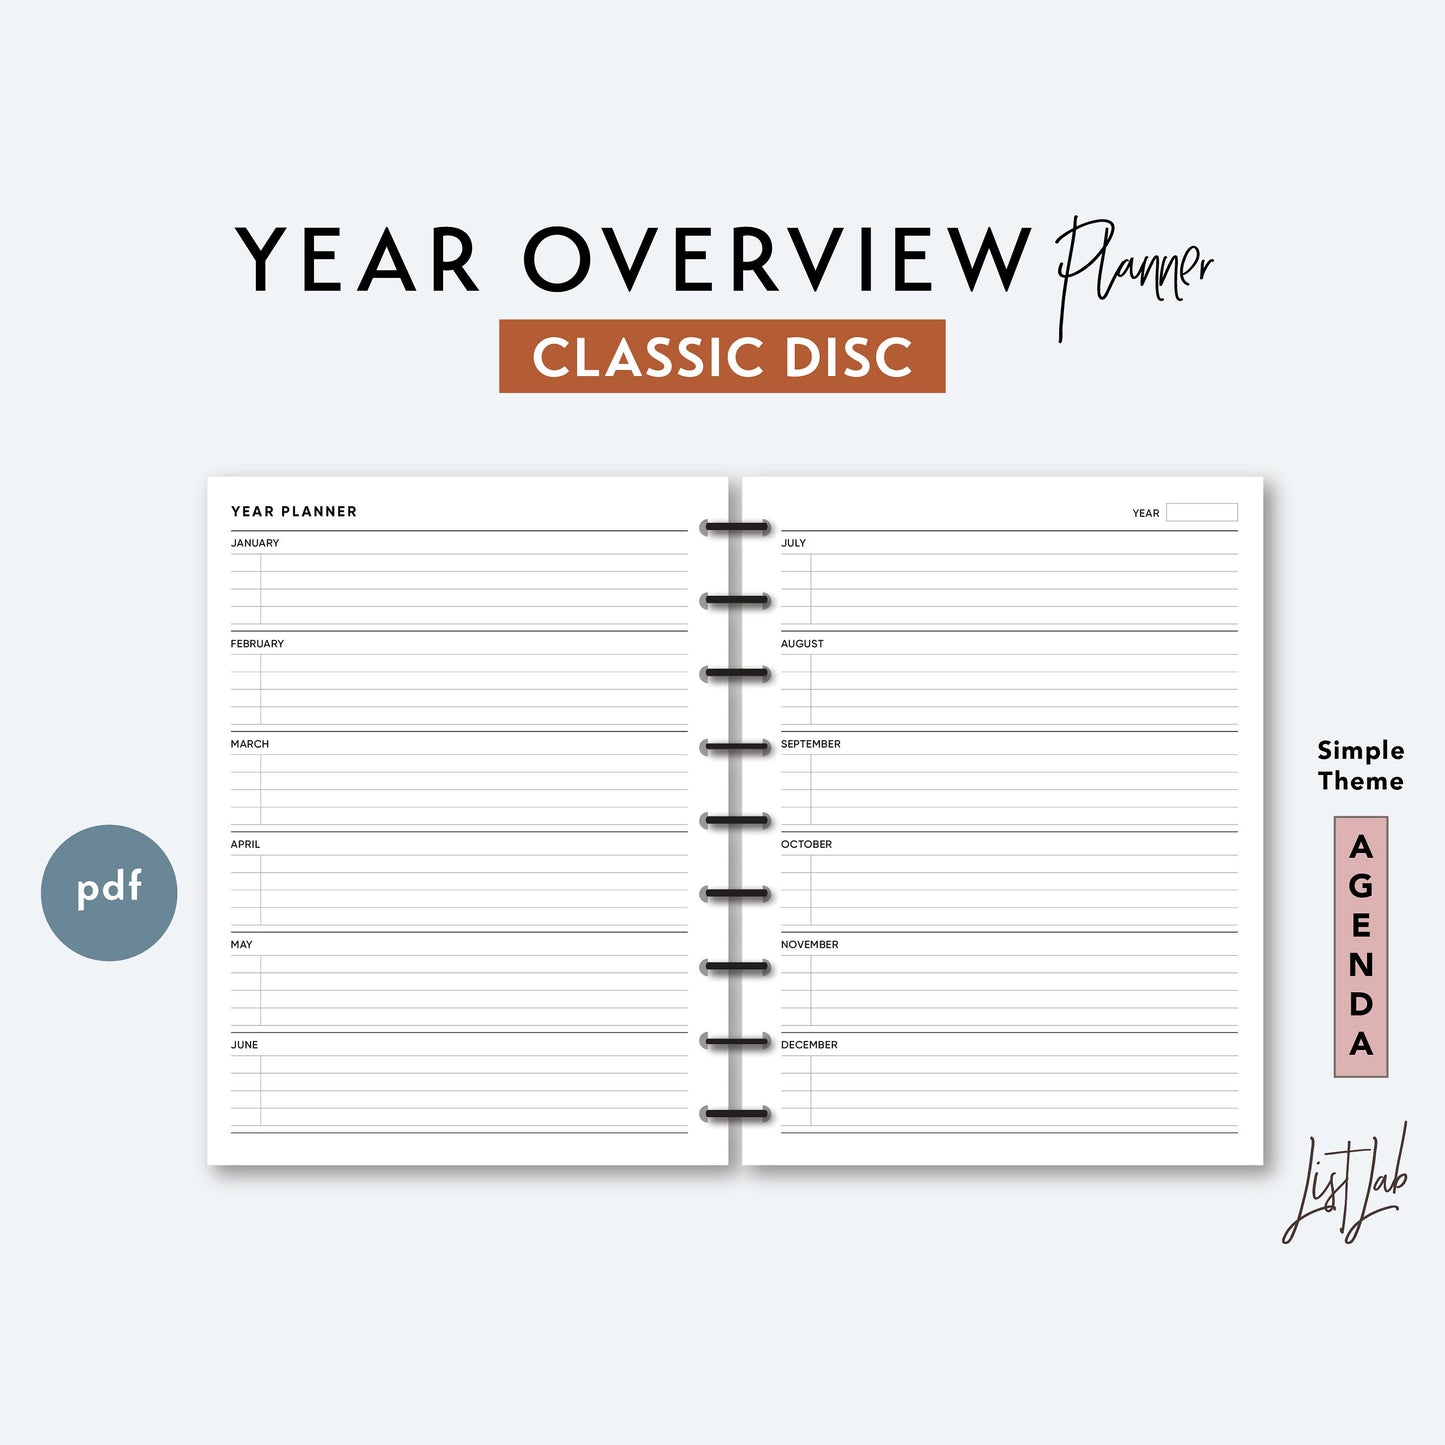 Classic Discbound YEAR OVERVIEW PLANNER Printable Insert Set